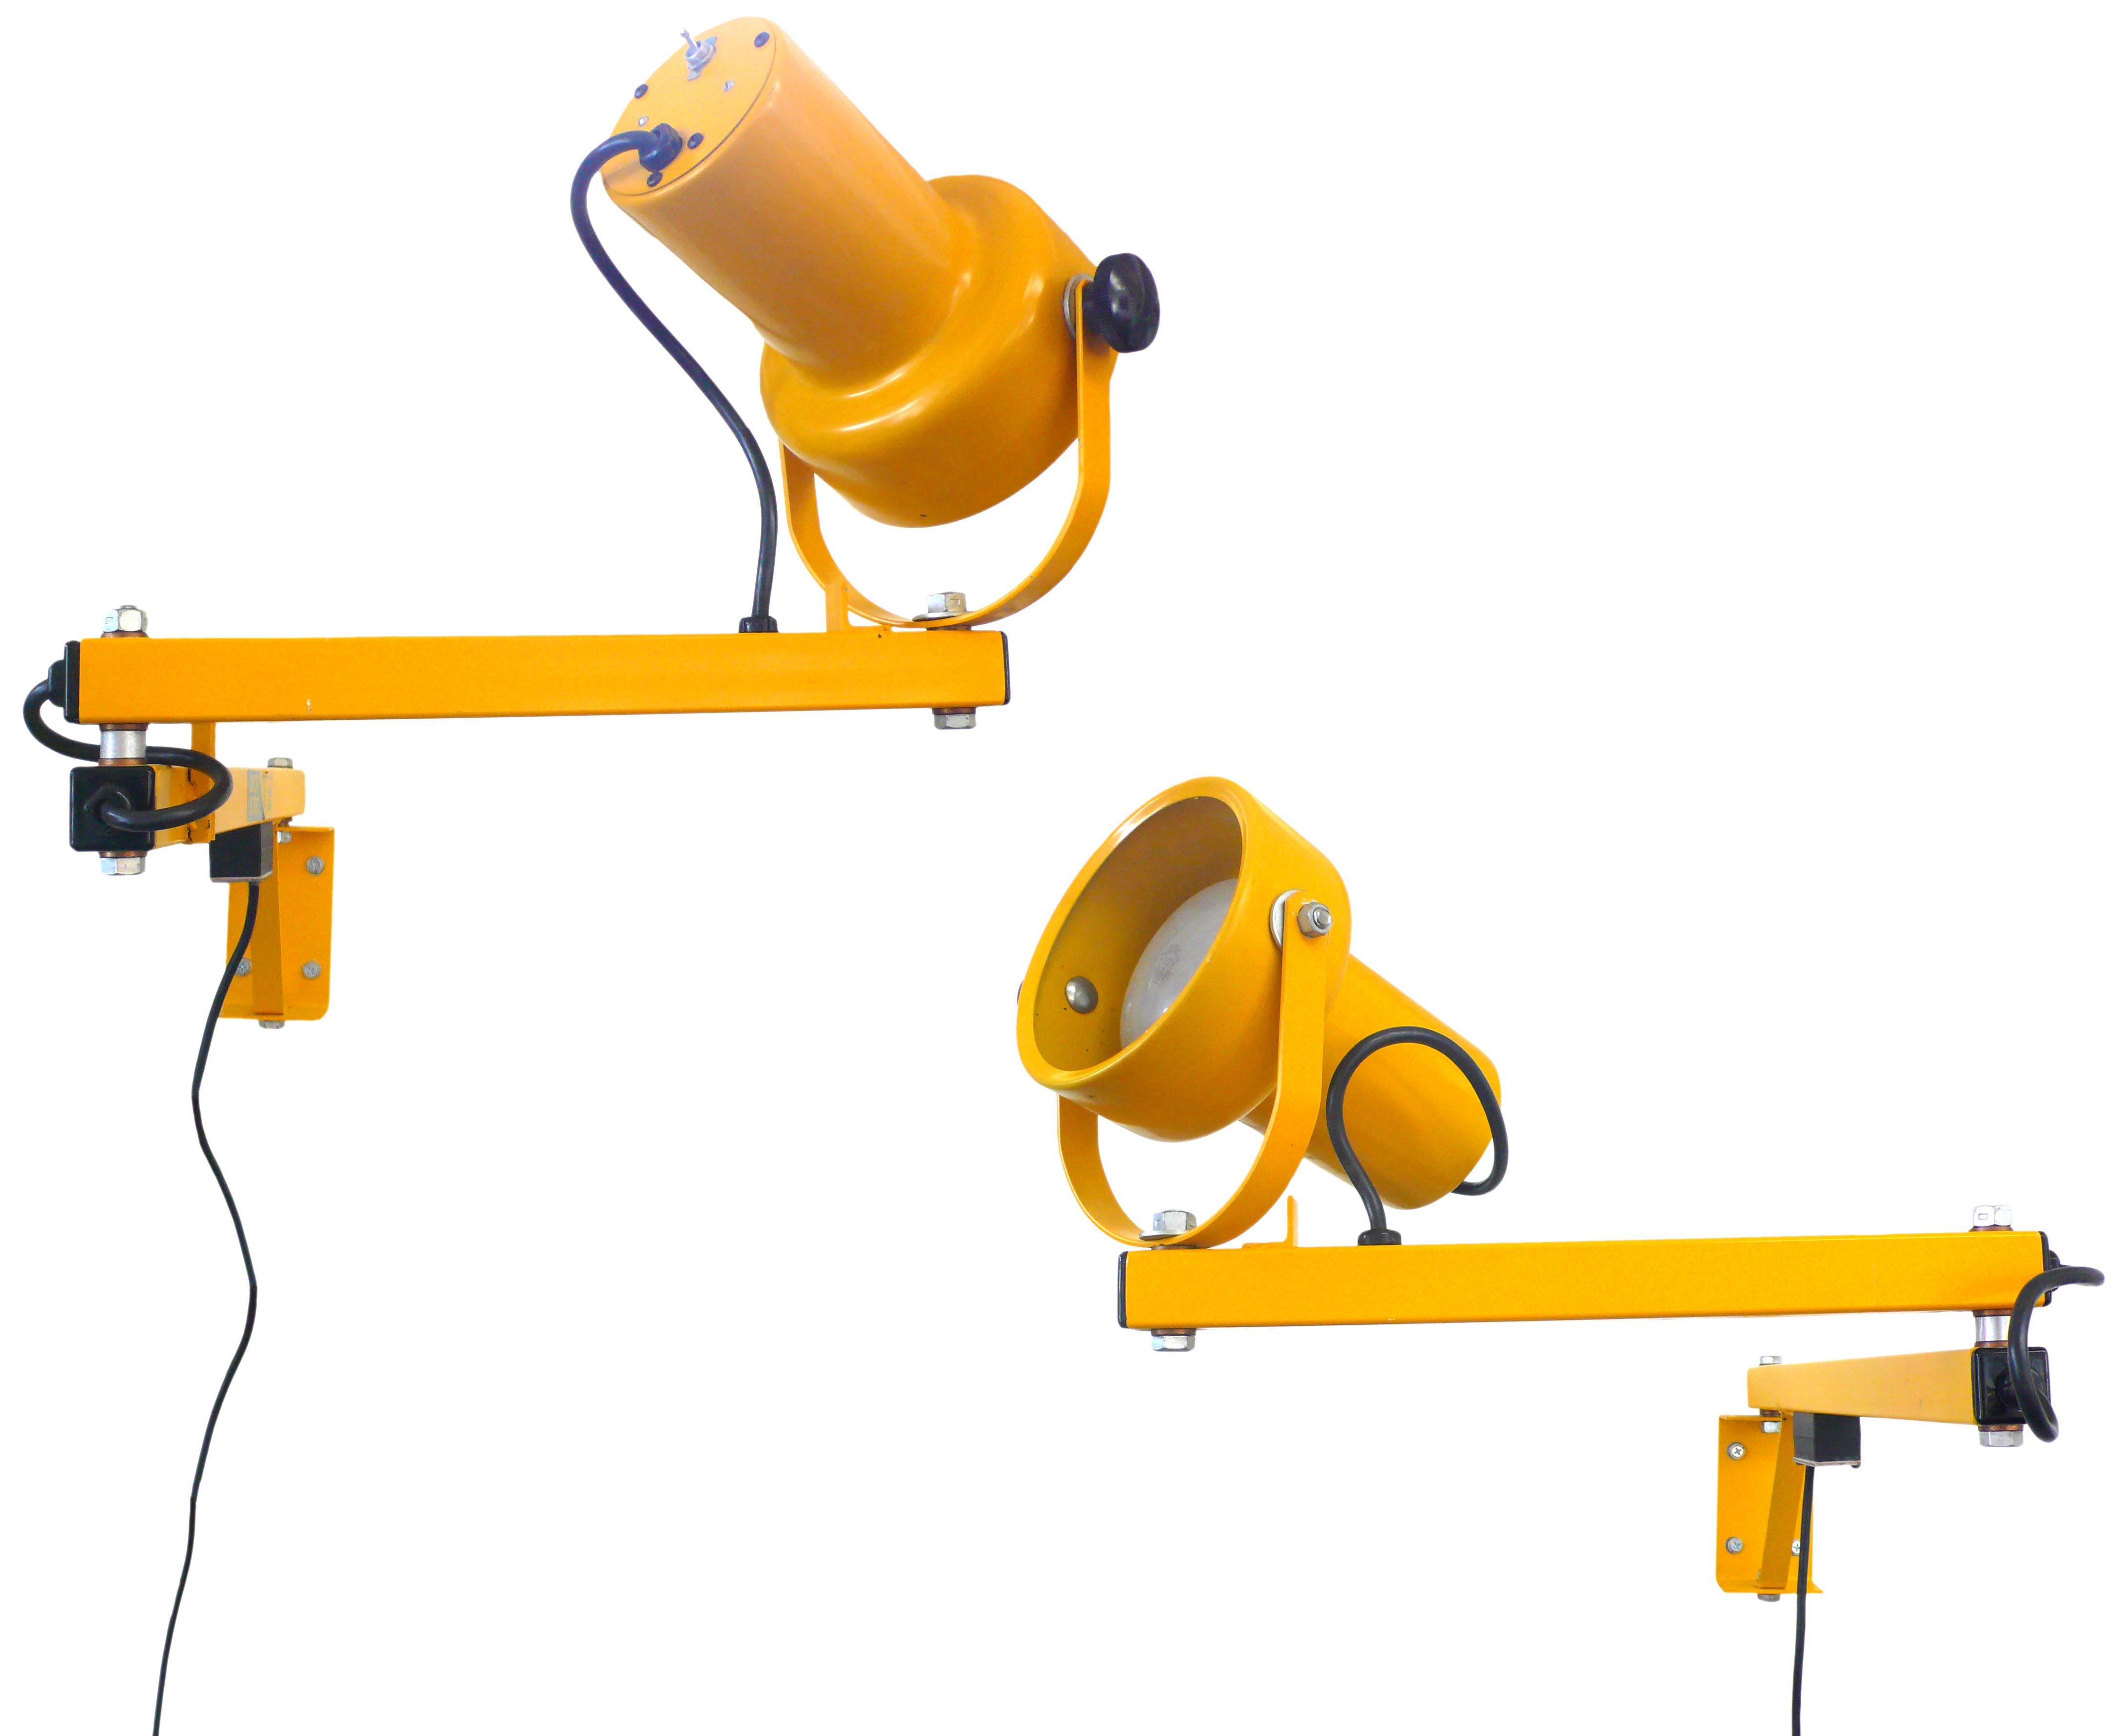 Pair of Articulated Wall-Mounting Industrial Lamps